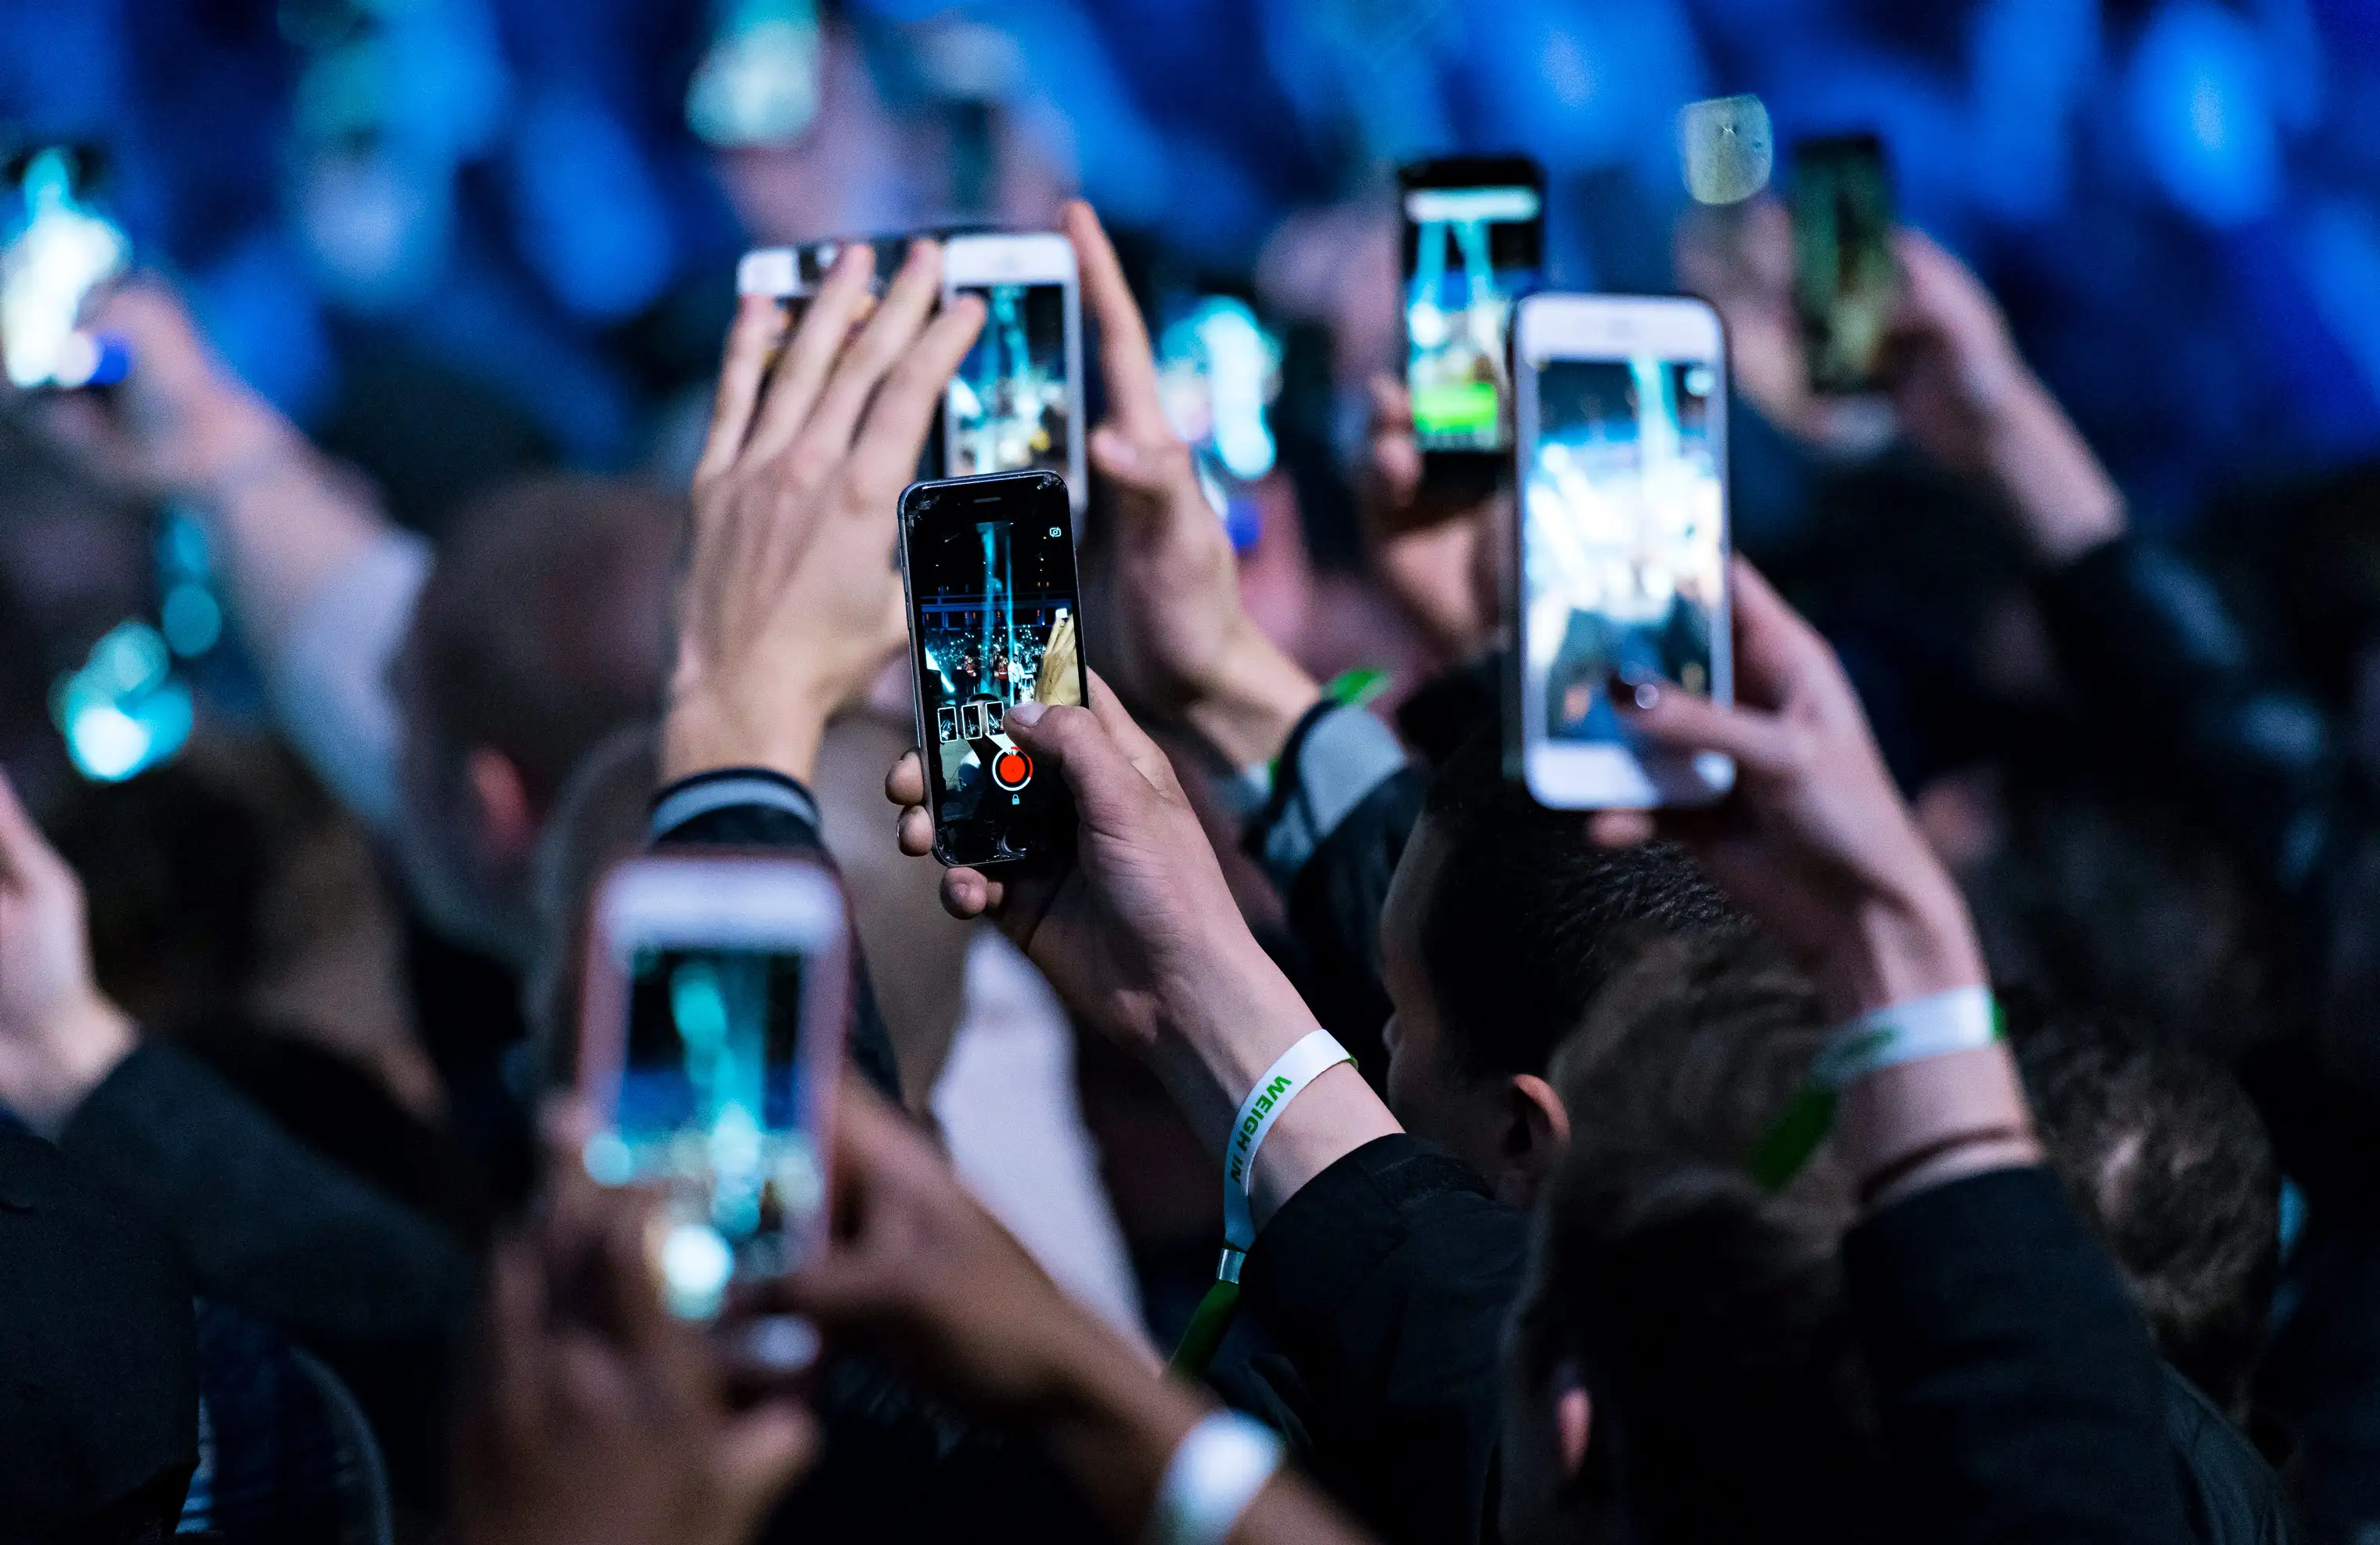 Spectators use their Apple iPhones at an event in Cardiff, United Kingdom.